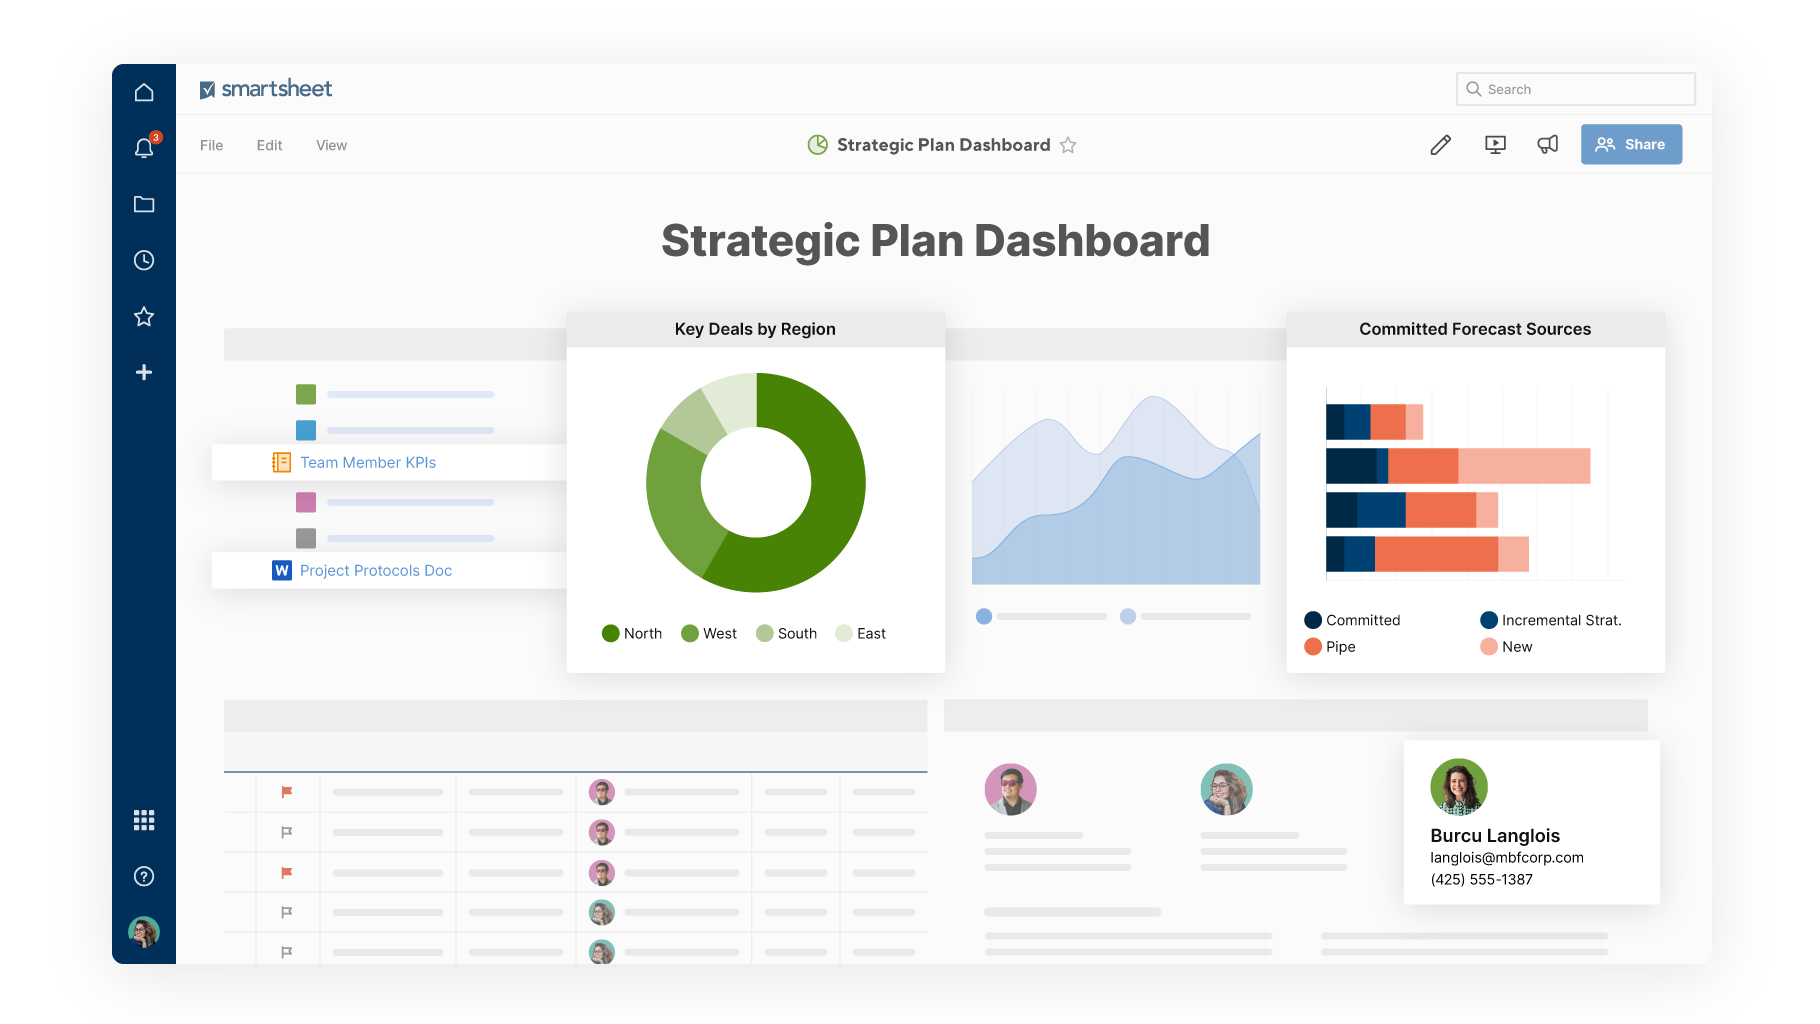 <p><span style="font-weight: 400;">Real-time dashboards in </span><a href="https://www.capterra.com/p/79104/Smartsheet/"><span style="font-weight: 400;">Smartsheet </span></a><span style="font-weight: 400;">(</span><a href="https://www.capterra.com/p/79104/Smartsheet/"><span style="font-weight: 400;">Source</span></a><span style="font-weight: 400;">)</span></p>
